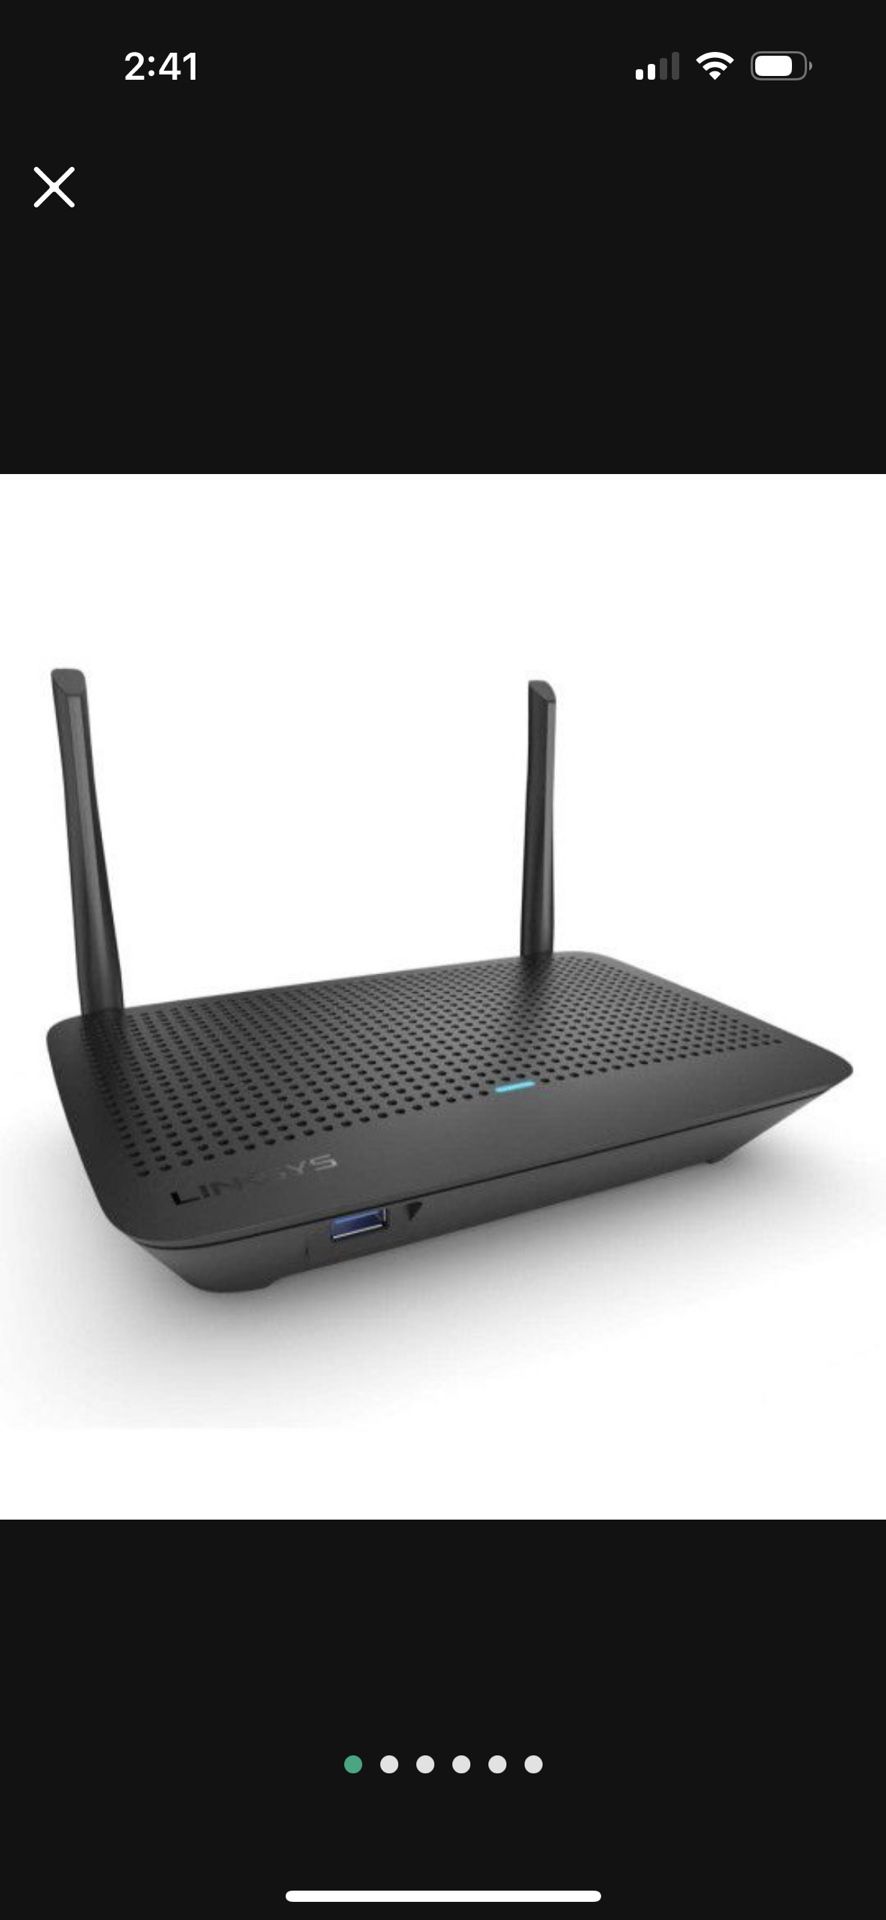 *NEW* Linksys Mesh Wifi 5 Router, Dual-Band, 1,200 Sq. ft Coverage, Supports Guest WiFi, Parent Control,12+ Devices, Speeds up to (AC1300) 1.3Gbps   